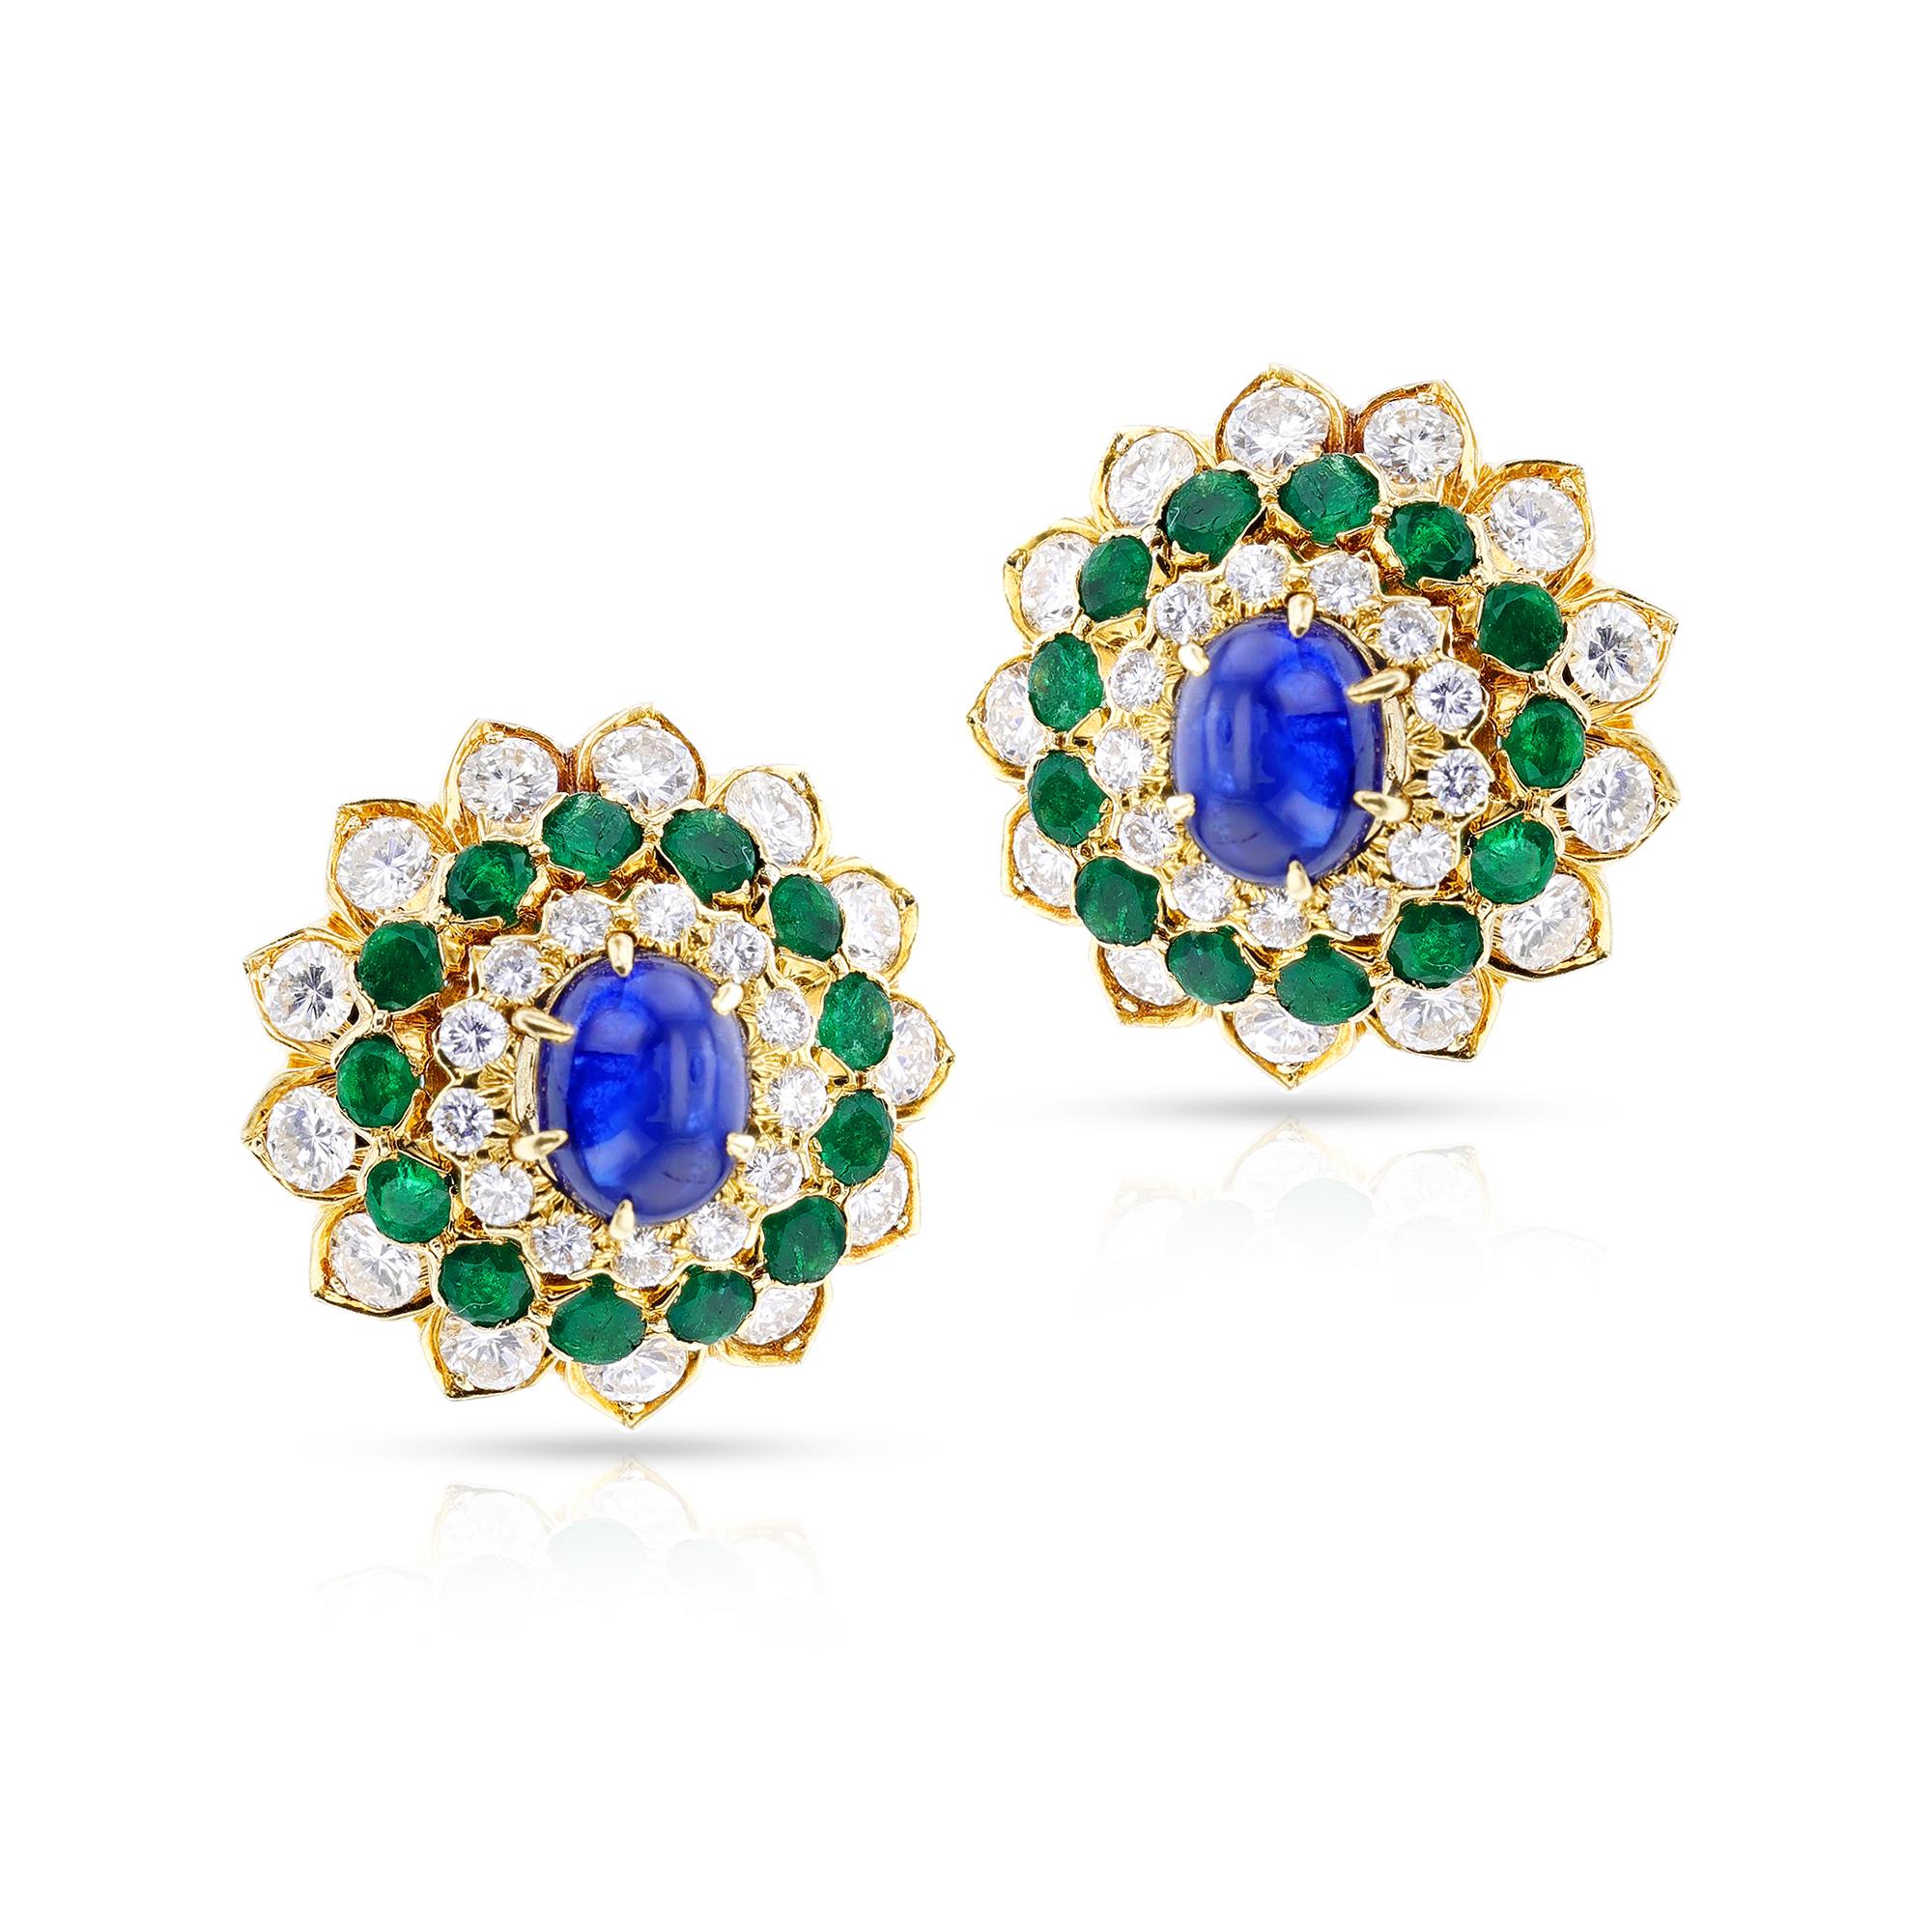 A pair of stunning David Webb Sapphire Cabochon, Emerald and Diamond Earrings made in 18k Yellow Gold. These floral earrings with a sapphire cabochon, and round emeralds and diamonds This luxurious combination of precious gemstones and metals will